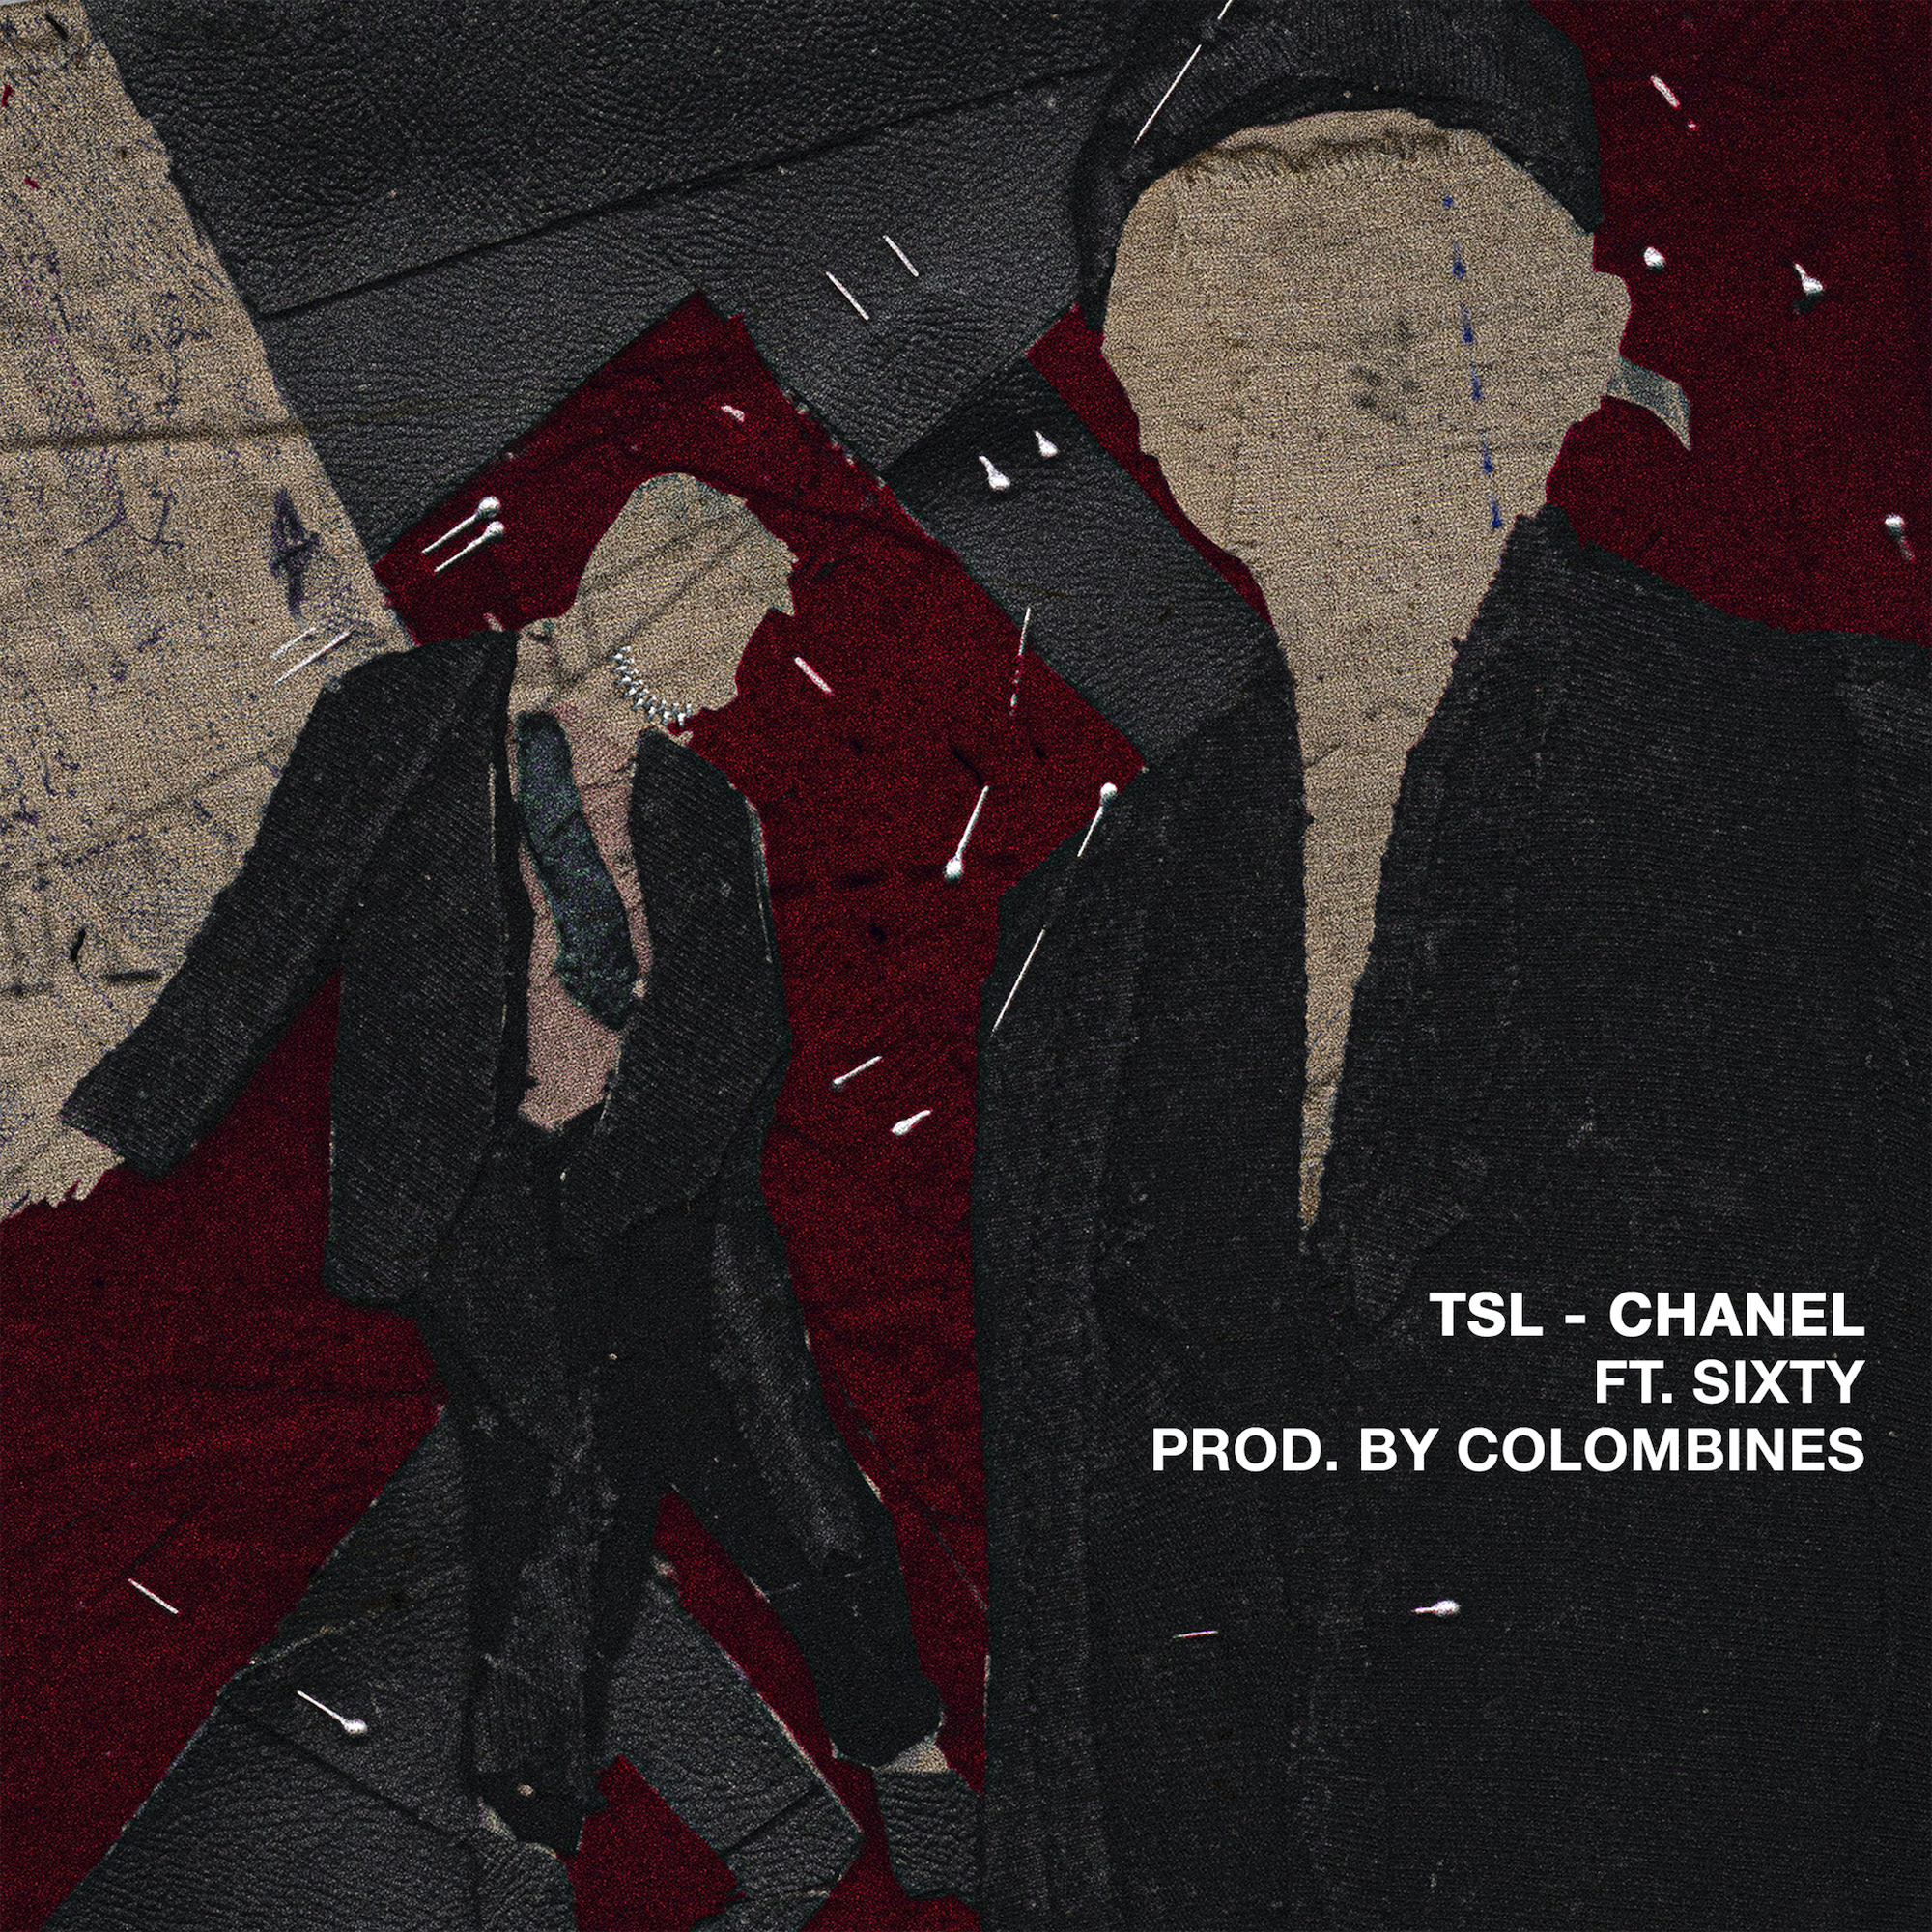 Chanel (ft. Sixty & COLOMBINES)